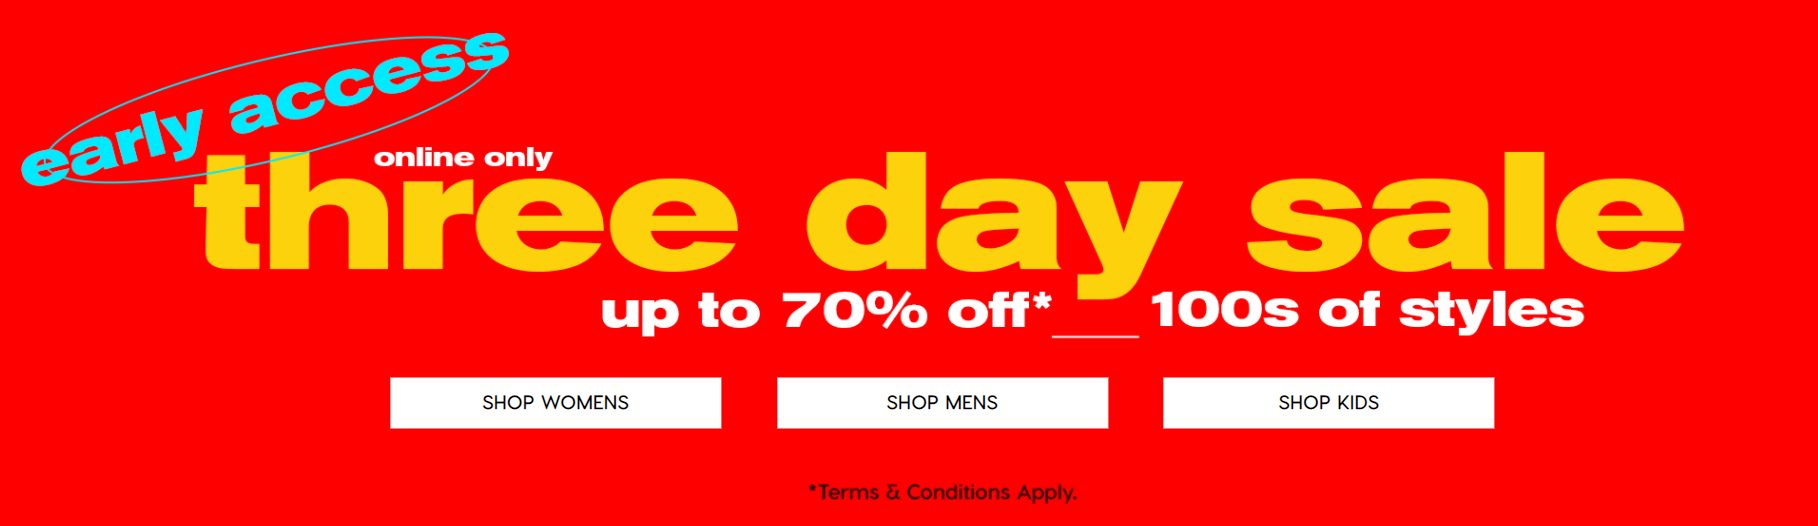 3 Day sale up to 70% OFF on 100's of styles for men, women &kids at City Beach